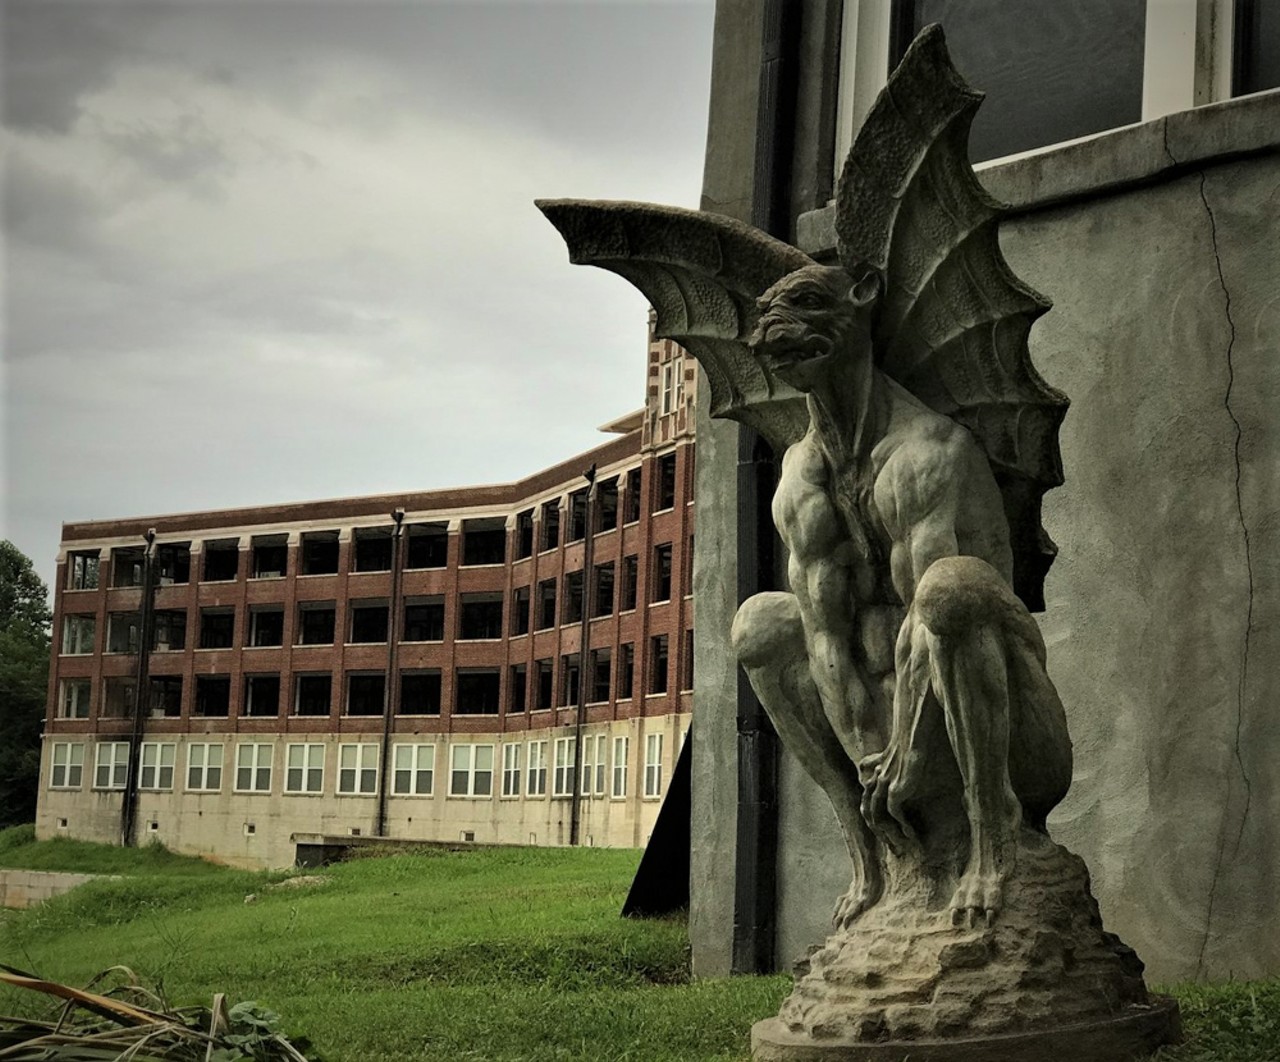 The Waverly Hills Sanatorium 
4400 Paralee Dr. 
The former sanatorium has quite a haunted history. A medical center where it is believed more than 6,000 people died, Waverly Hills is rumored to be haunted by spirits, orbs, and other paranormal activity. Photo via  The Waverly Hills Sanatorium/Facebook 